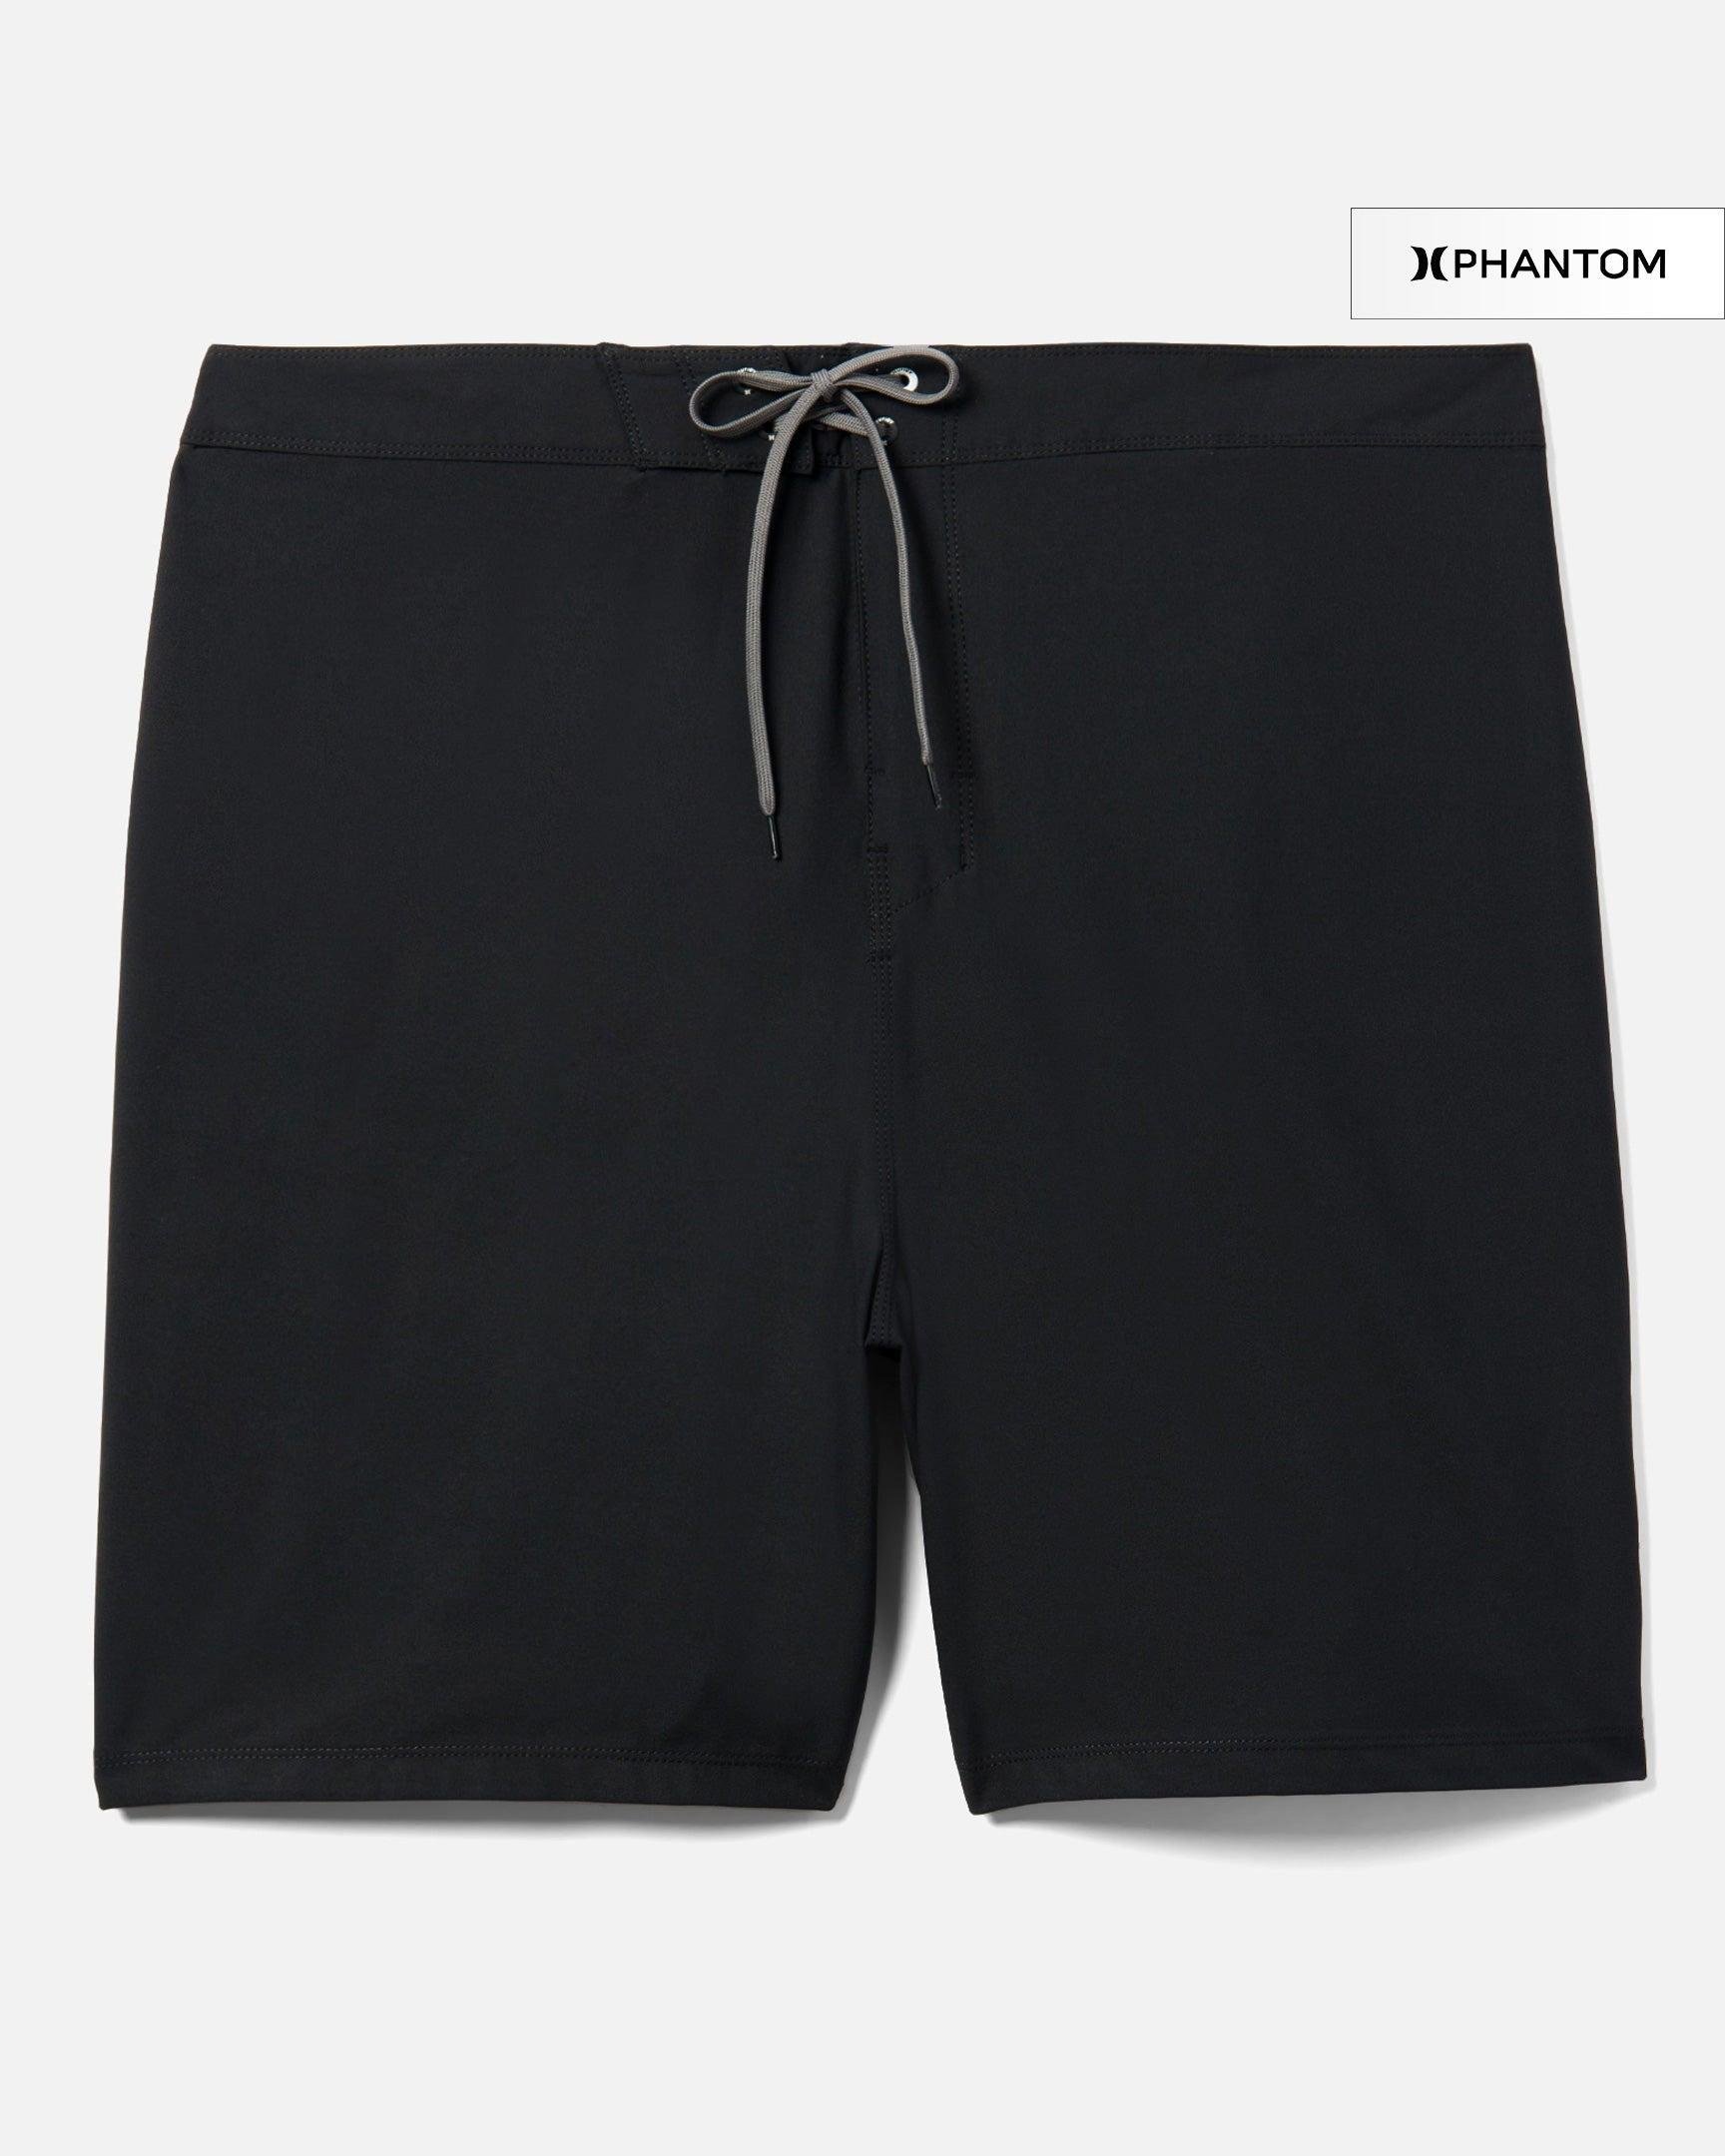 Men's Big & Tall Phantom One And Only Solid Boardshorts by HURLEY